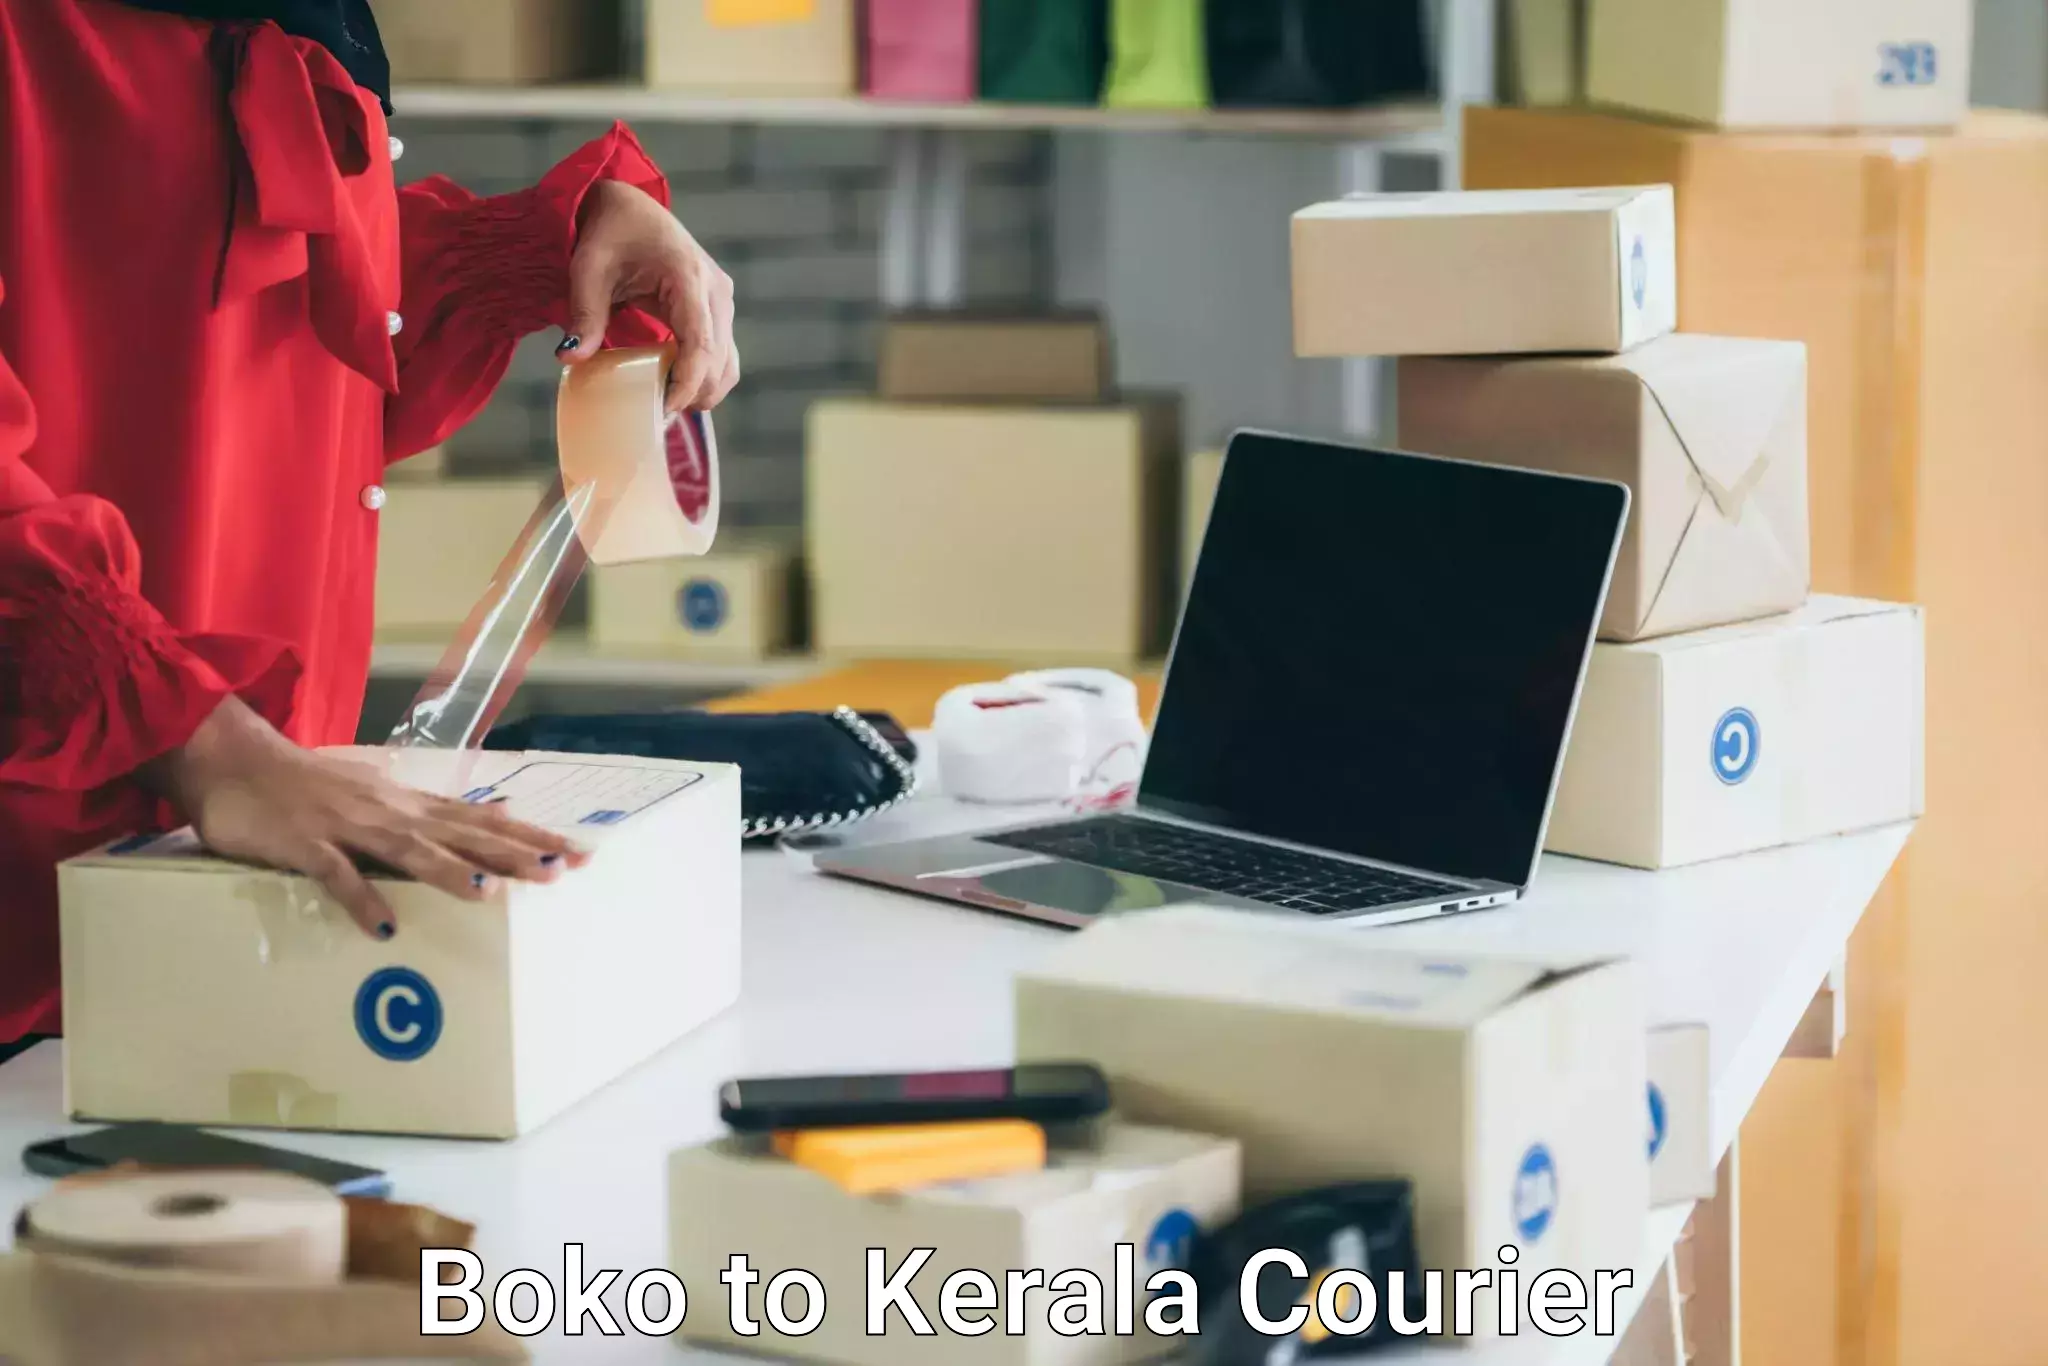 Moving and packing experts Boko to Kerala